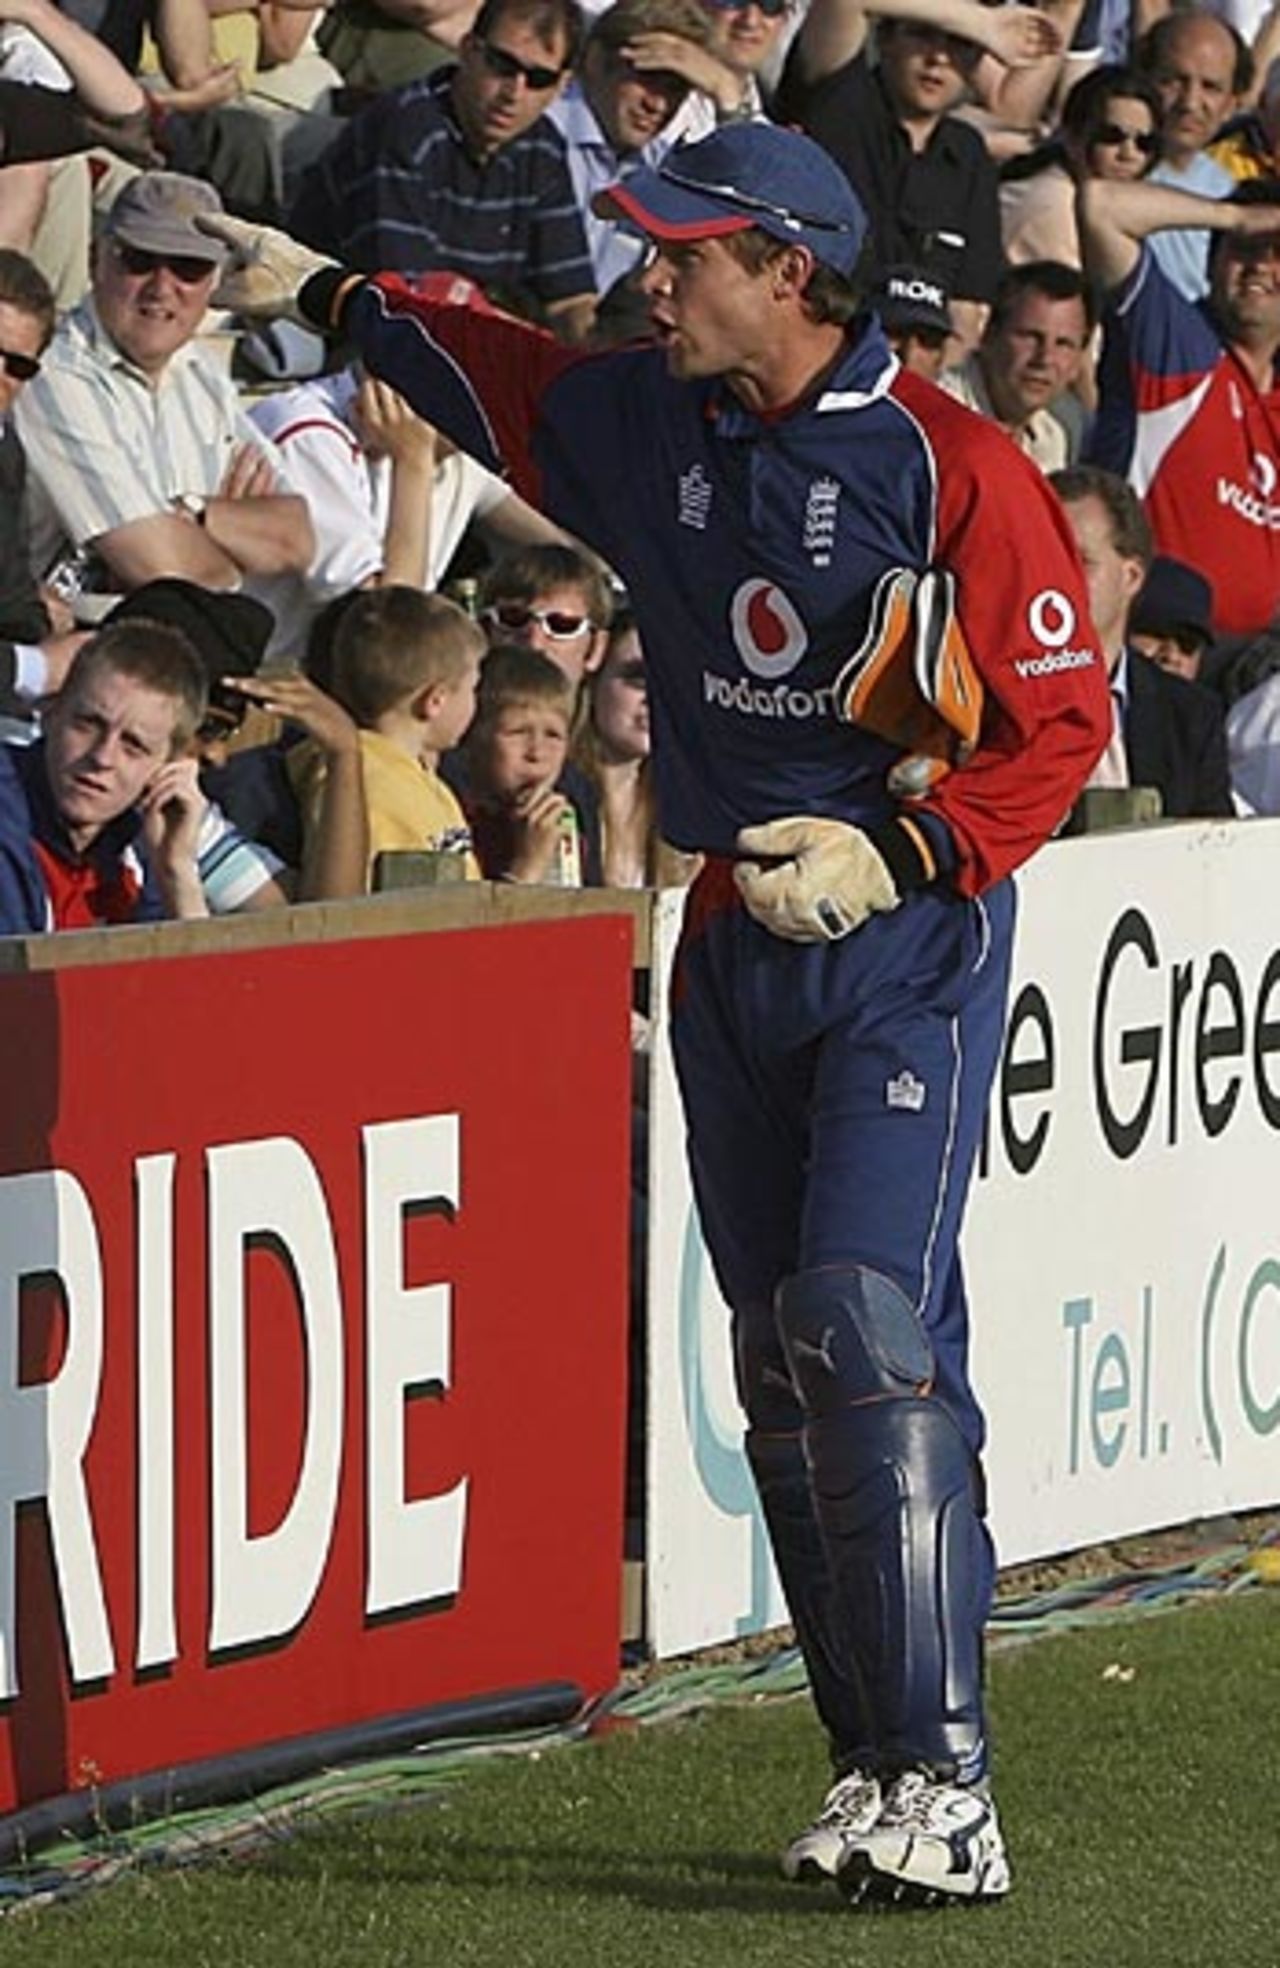 Geraint Jones points out a spectator to a steward after he took exception to a comment made when Ed Joyce was lying injured , England v Sri Lanka, Twenty20, Southampton, June 15, 2006